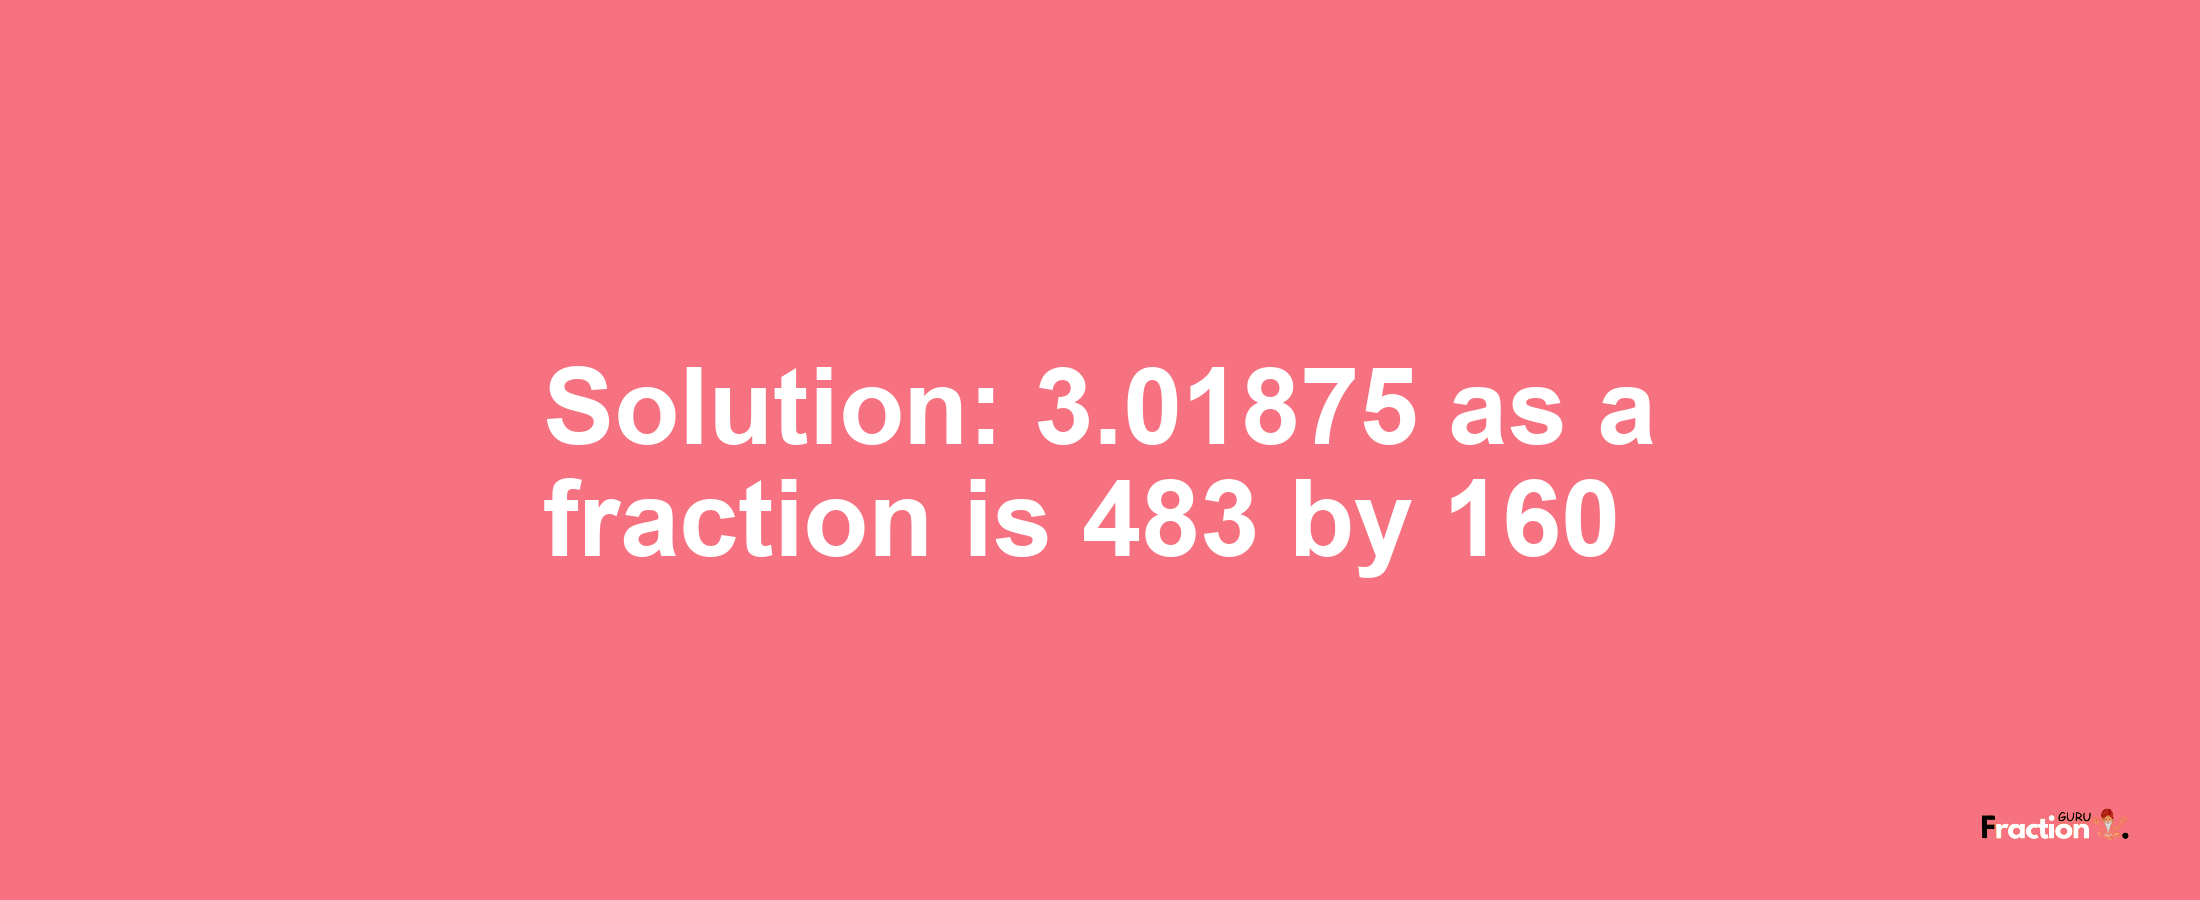 Solution:3.01875 as a fraction is 483/160